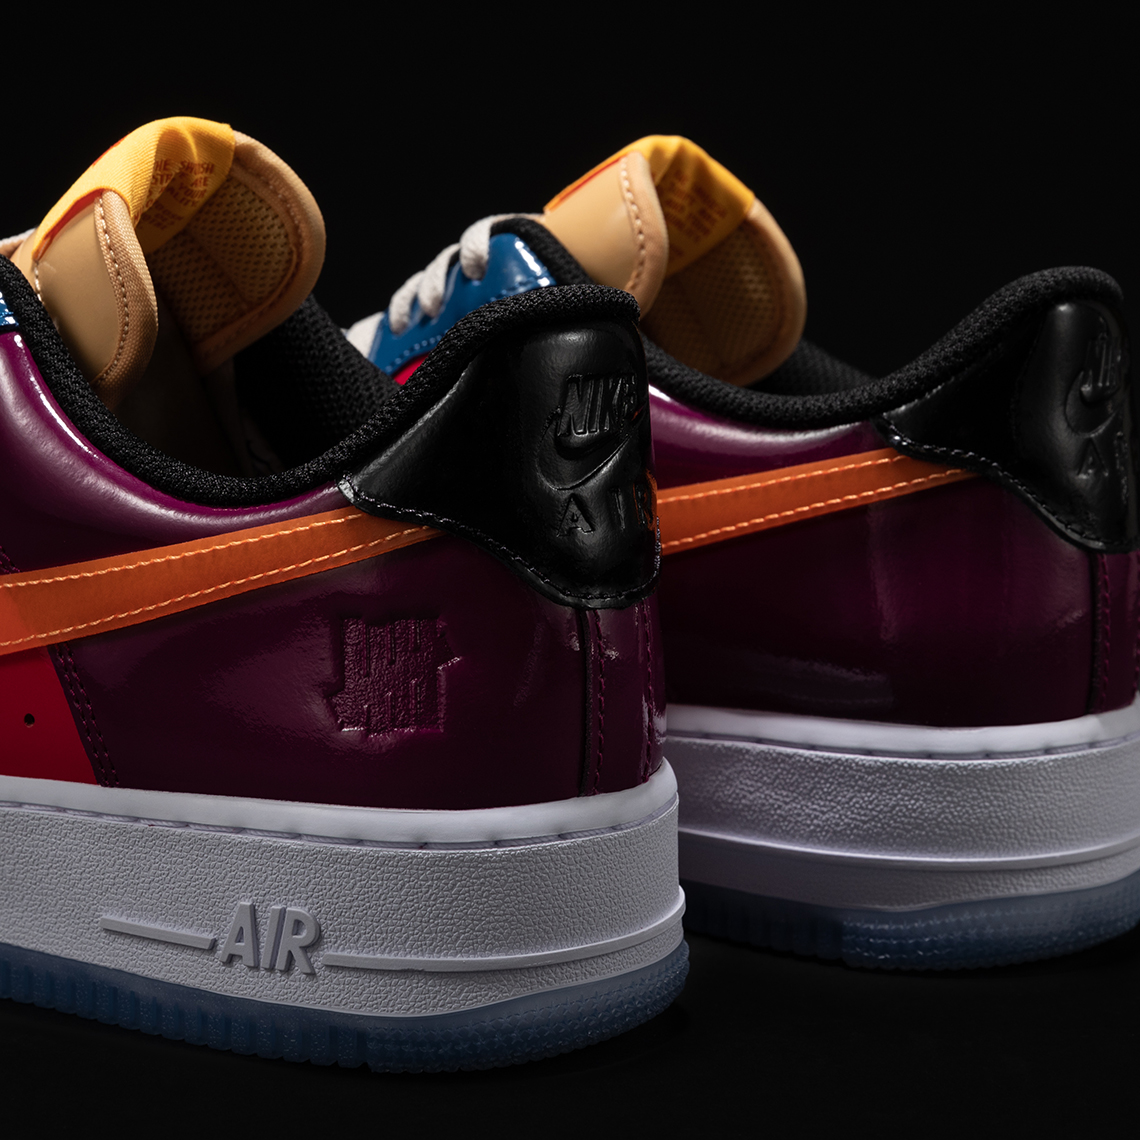 undefeated nike air force 1 patent total orange 2